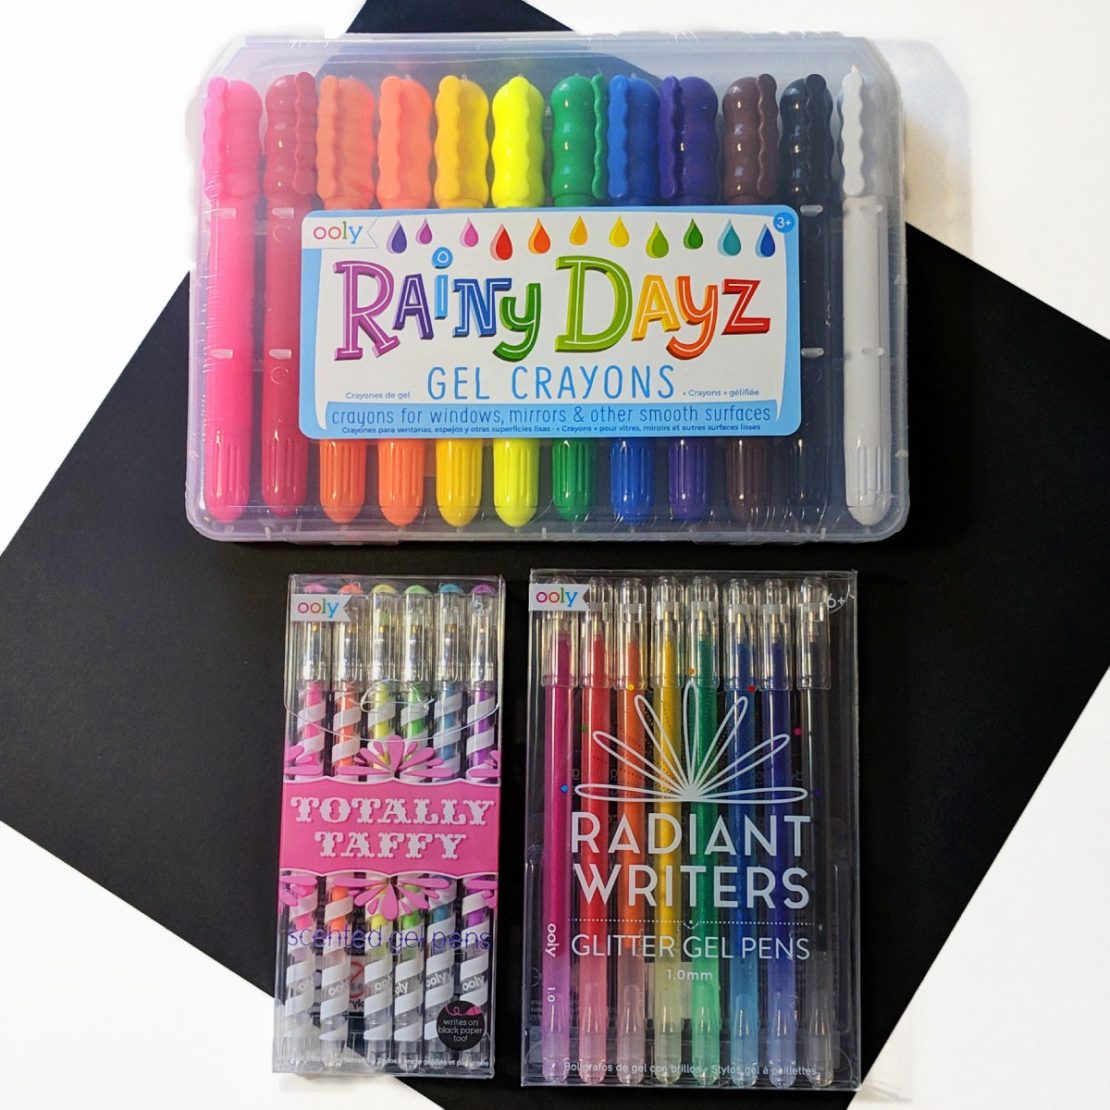 Ooly Rainy Dayz Gel Crayons, Radiant Writers Glitter Gel Pens, and Totally Taffy Scented Gel Pens